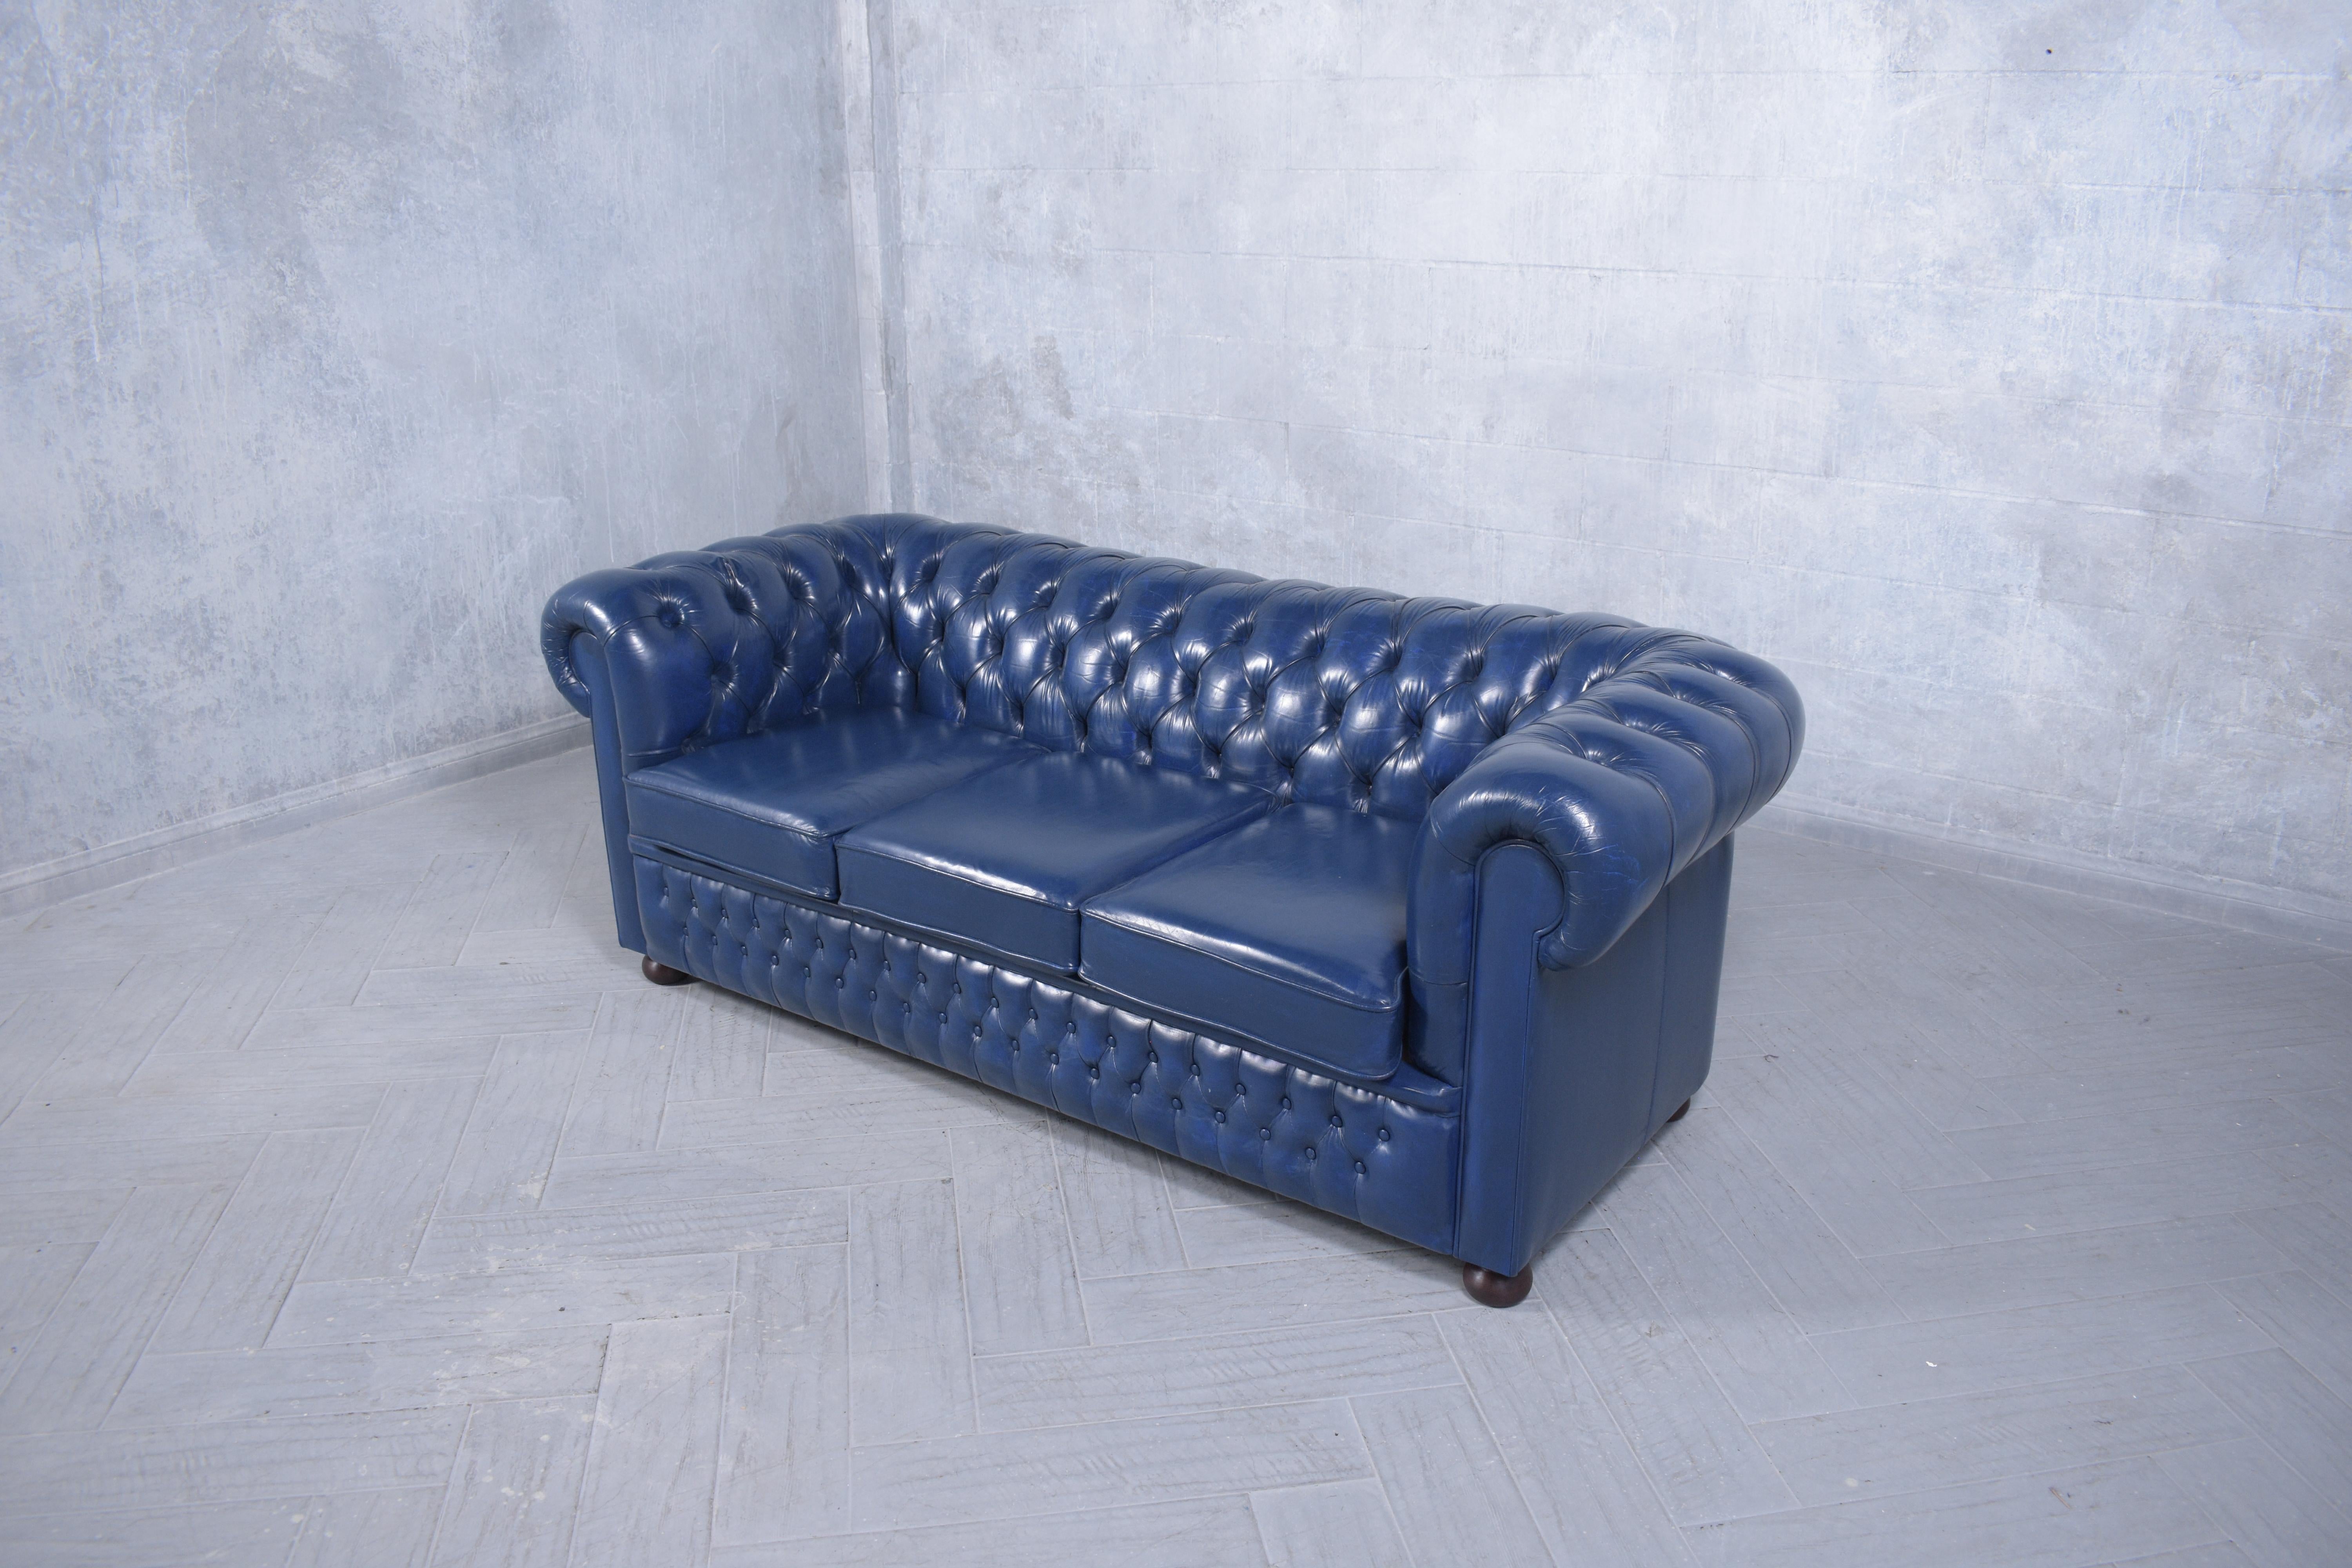 English Restored Vintage Chesterfield Sofa in Distressed Navy Leather